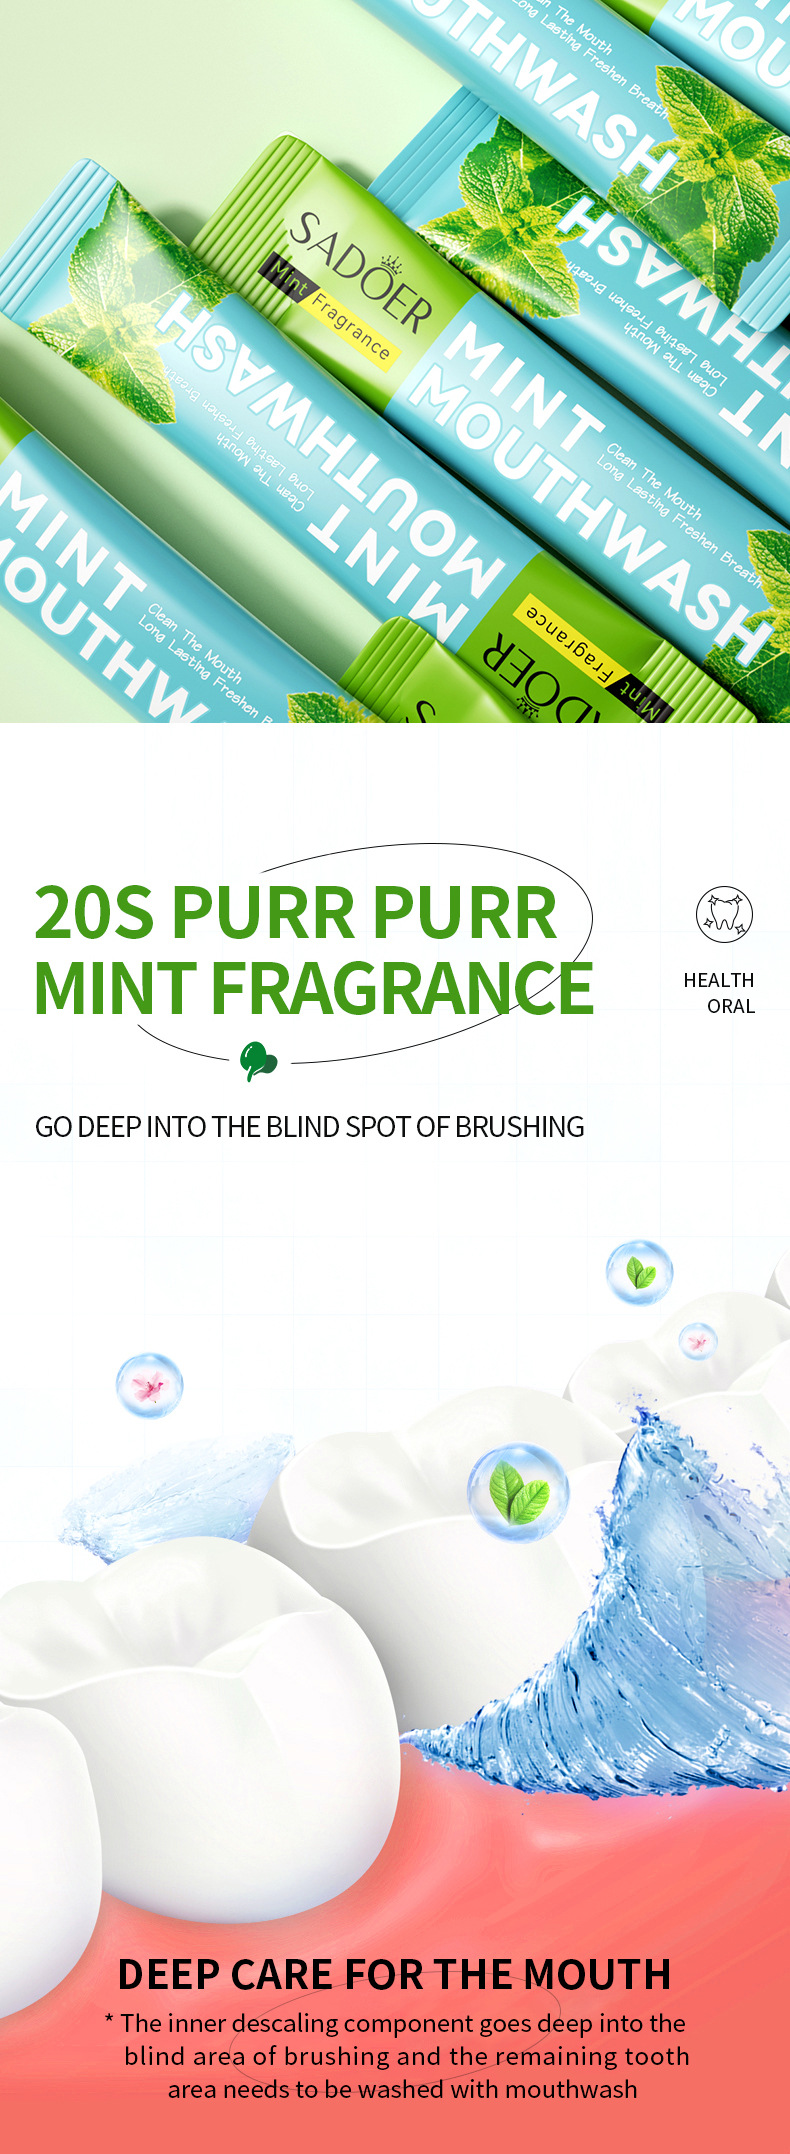 Buy Land Art Breath Freshener Mint (16 Un. Box) with same day delivery at  MarchesTAU